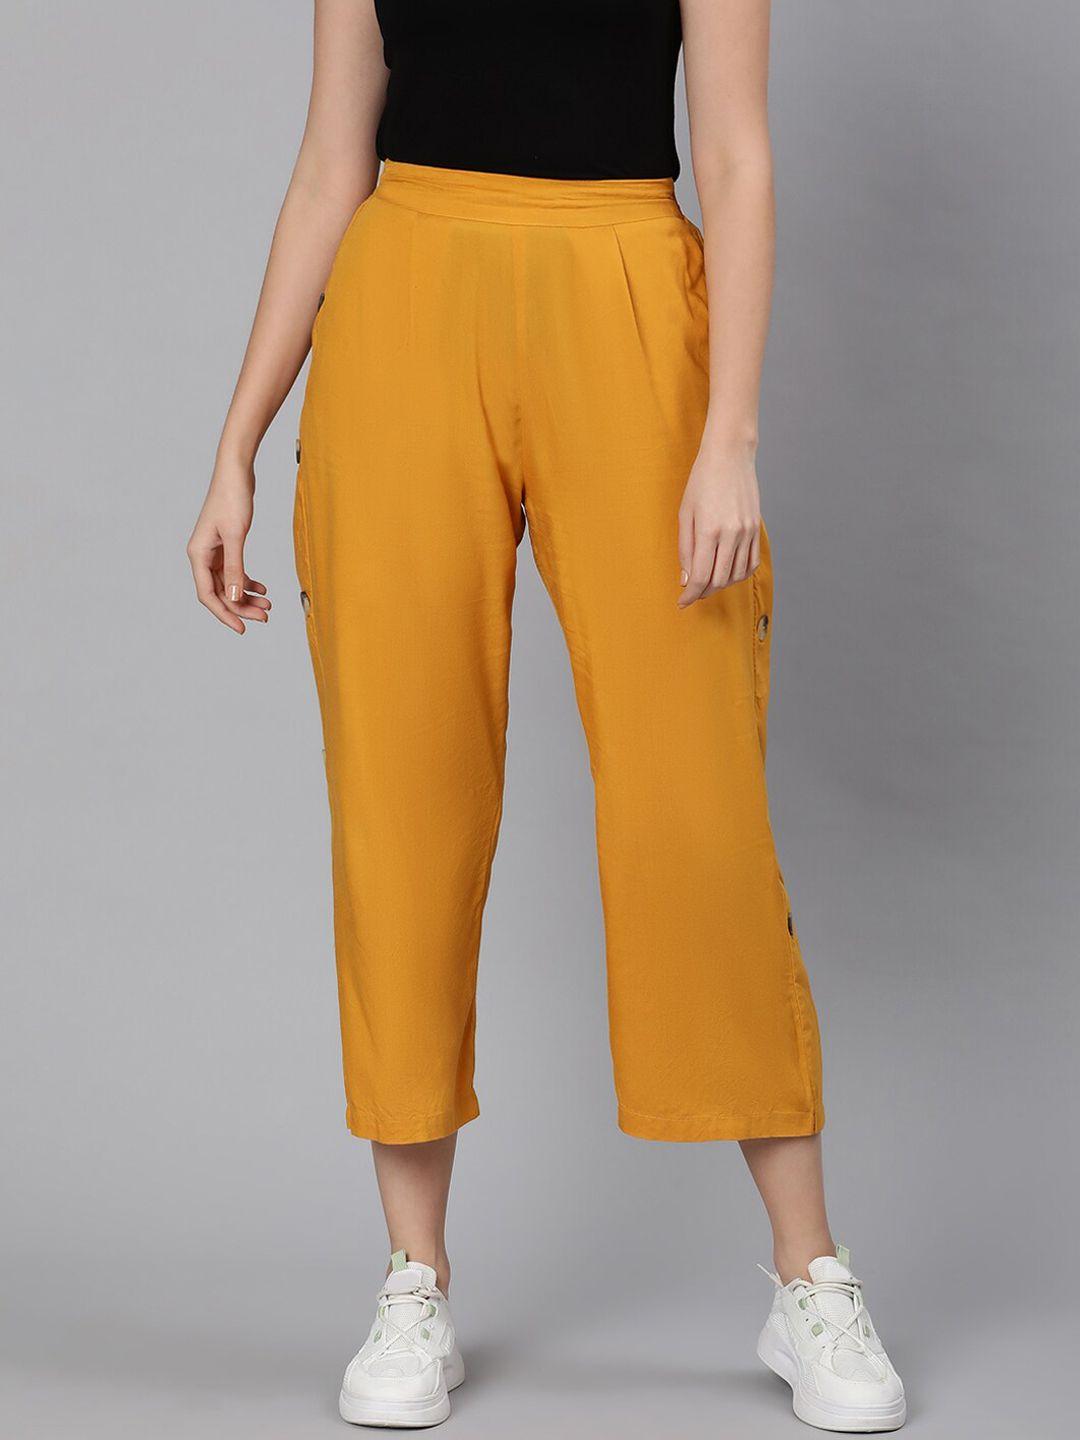 oxolloxo women yellow easy wash pleated culottes trousers